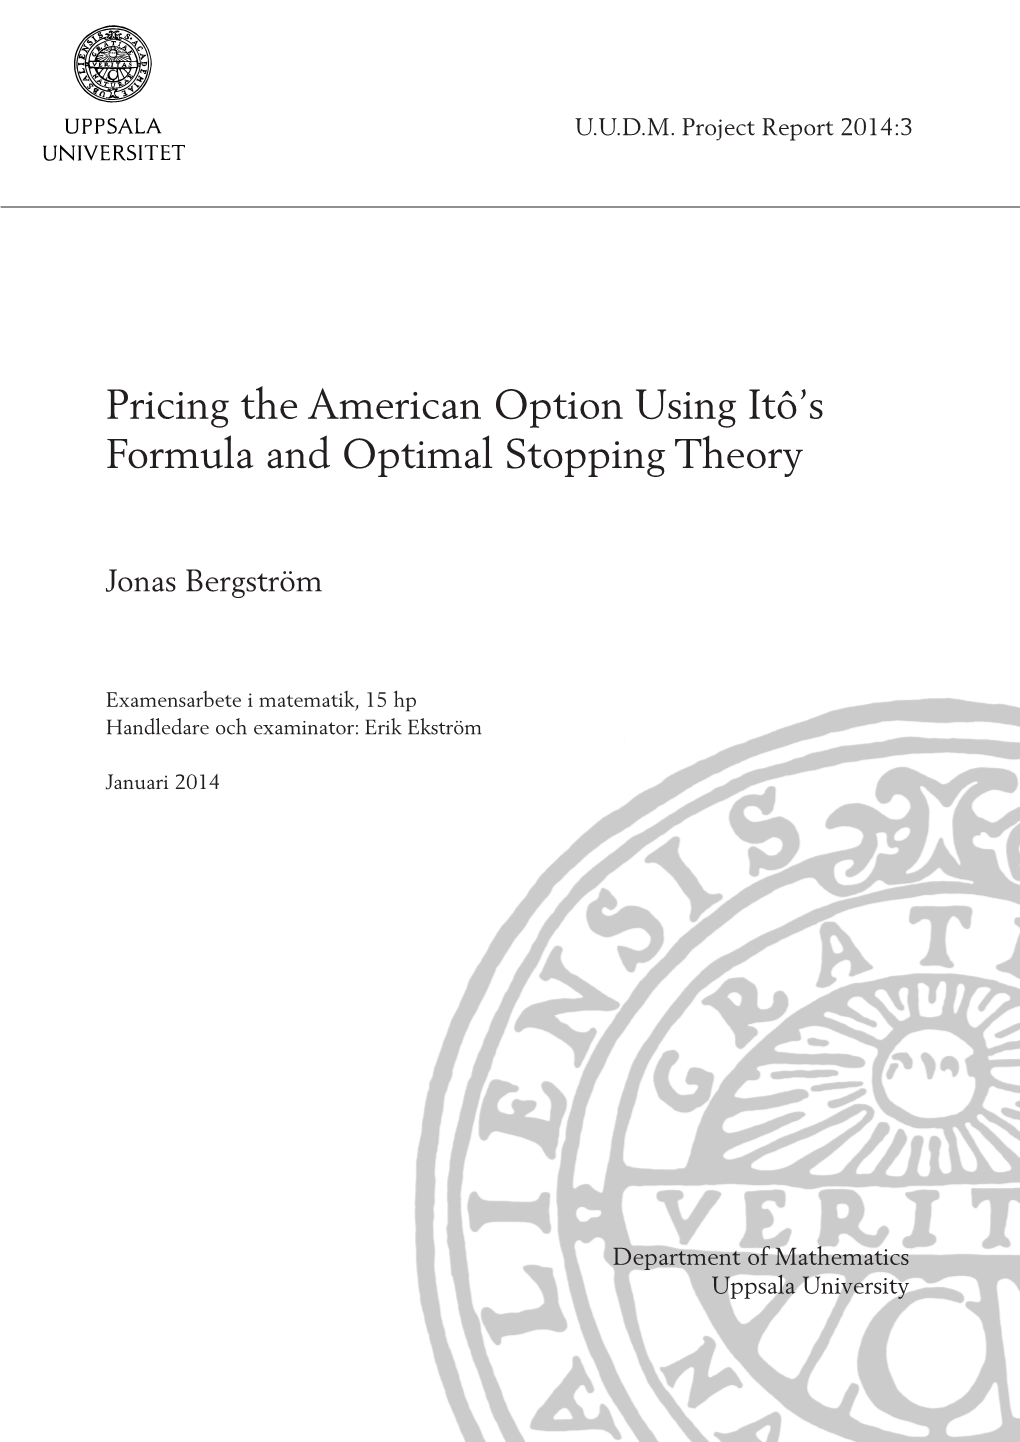 Pricing the American Option Using Itô's Formula and Optimal Stopping